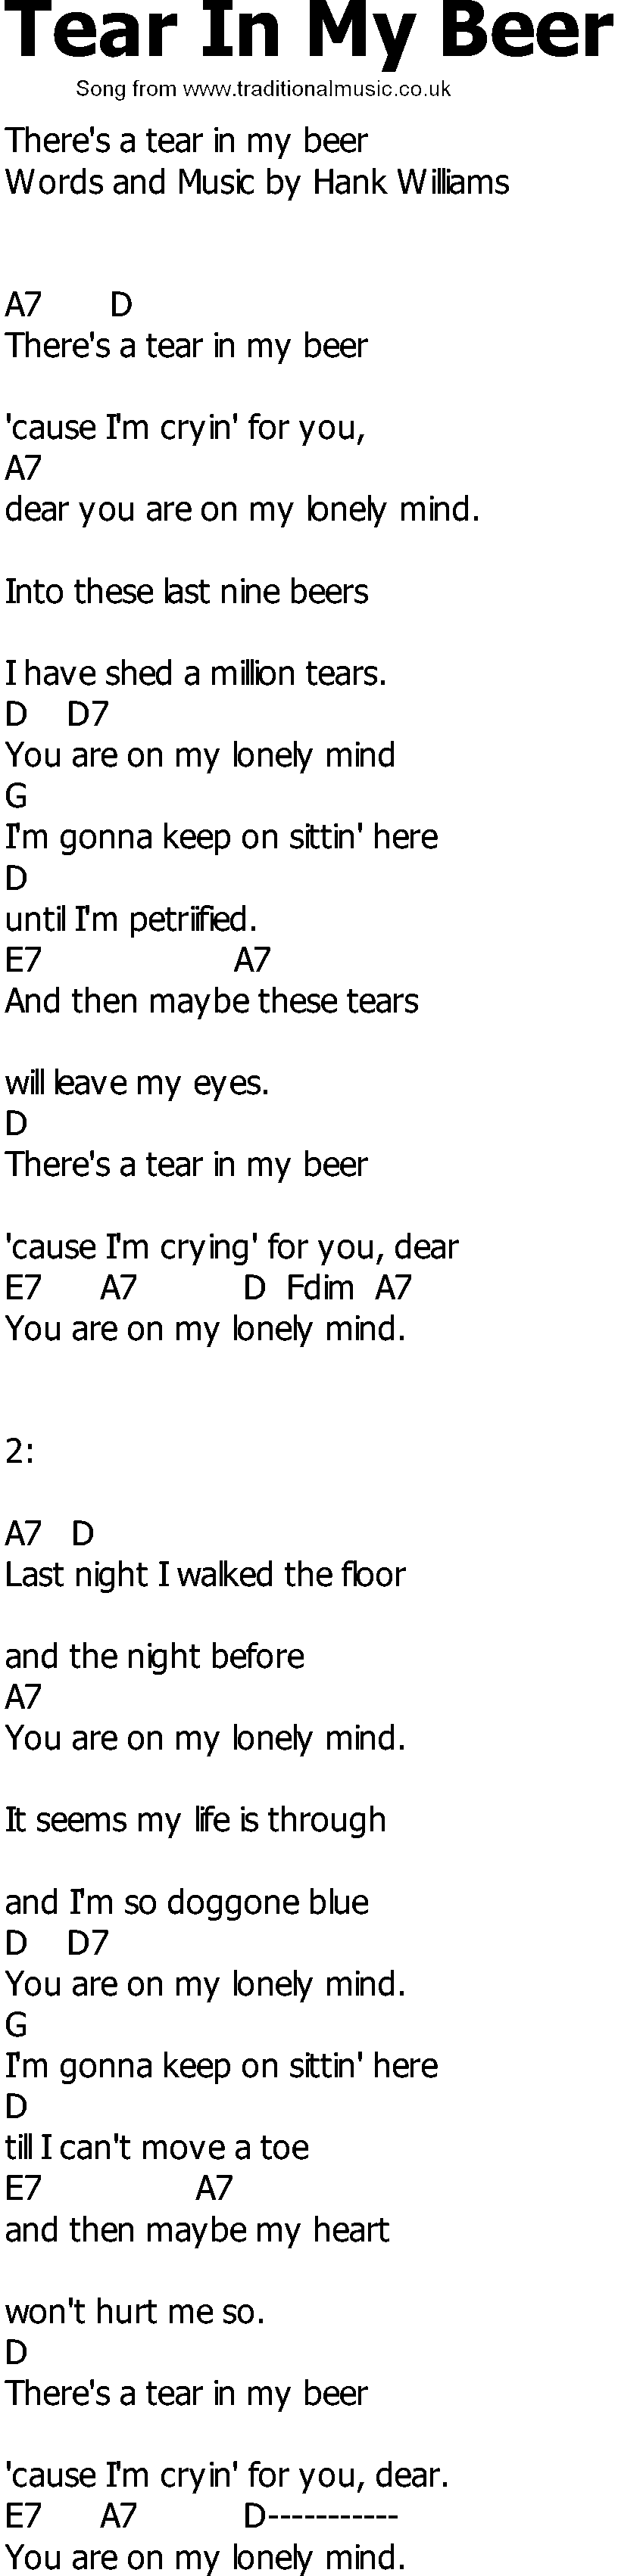 Old Country song lyrics with chords - Tear In My Beer